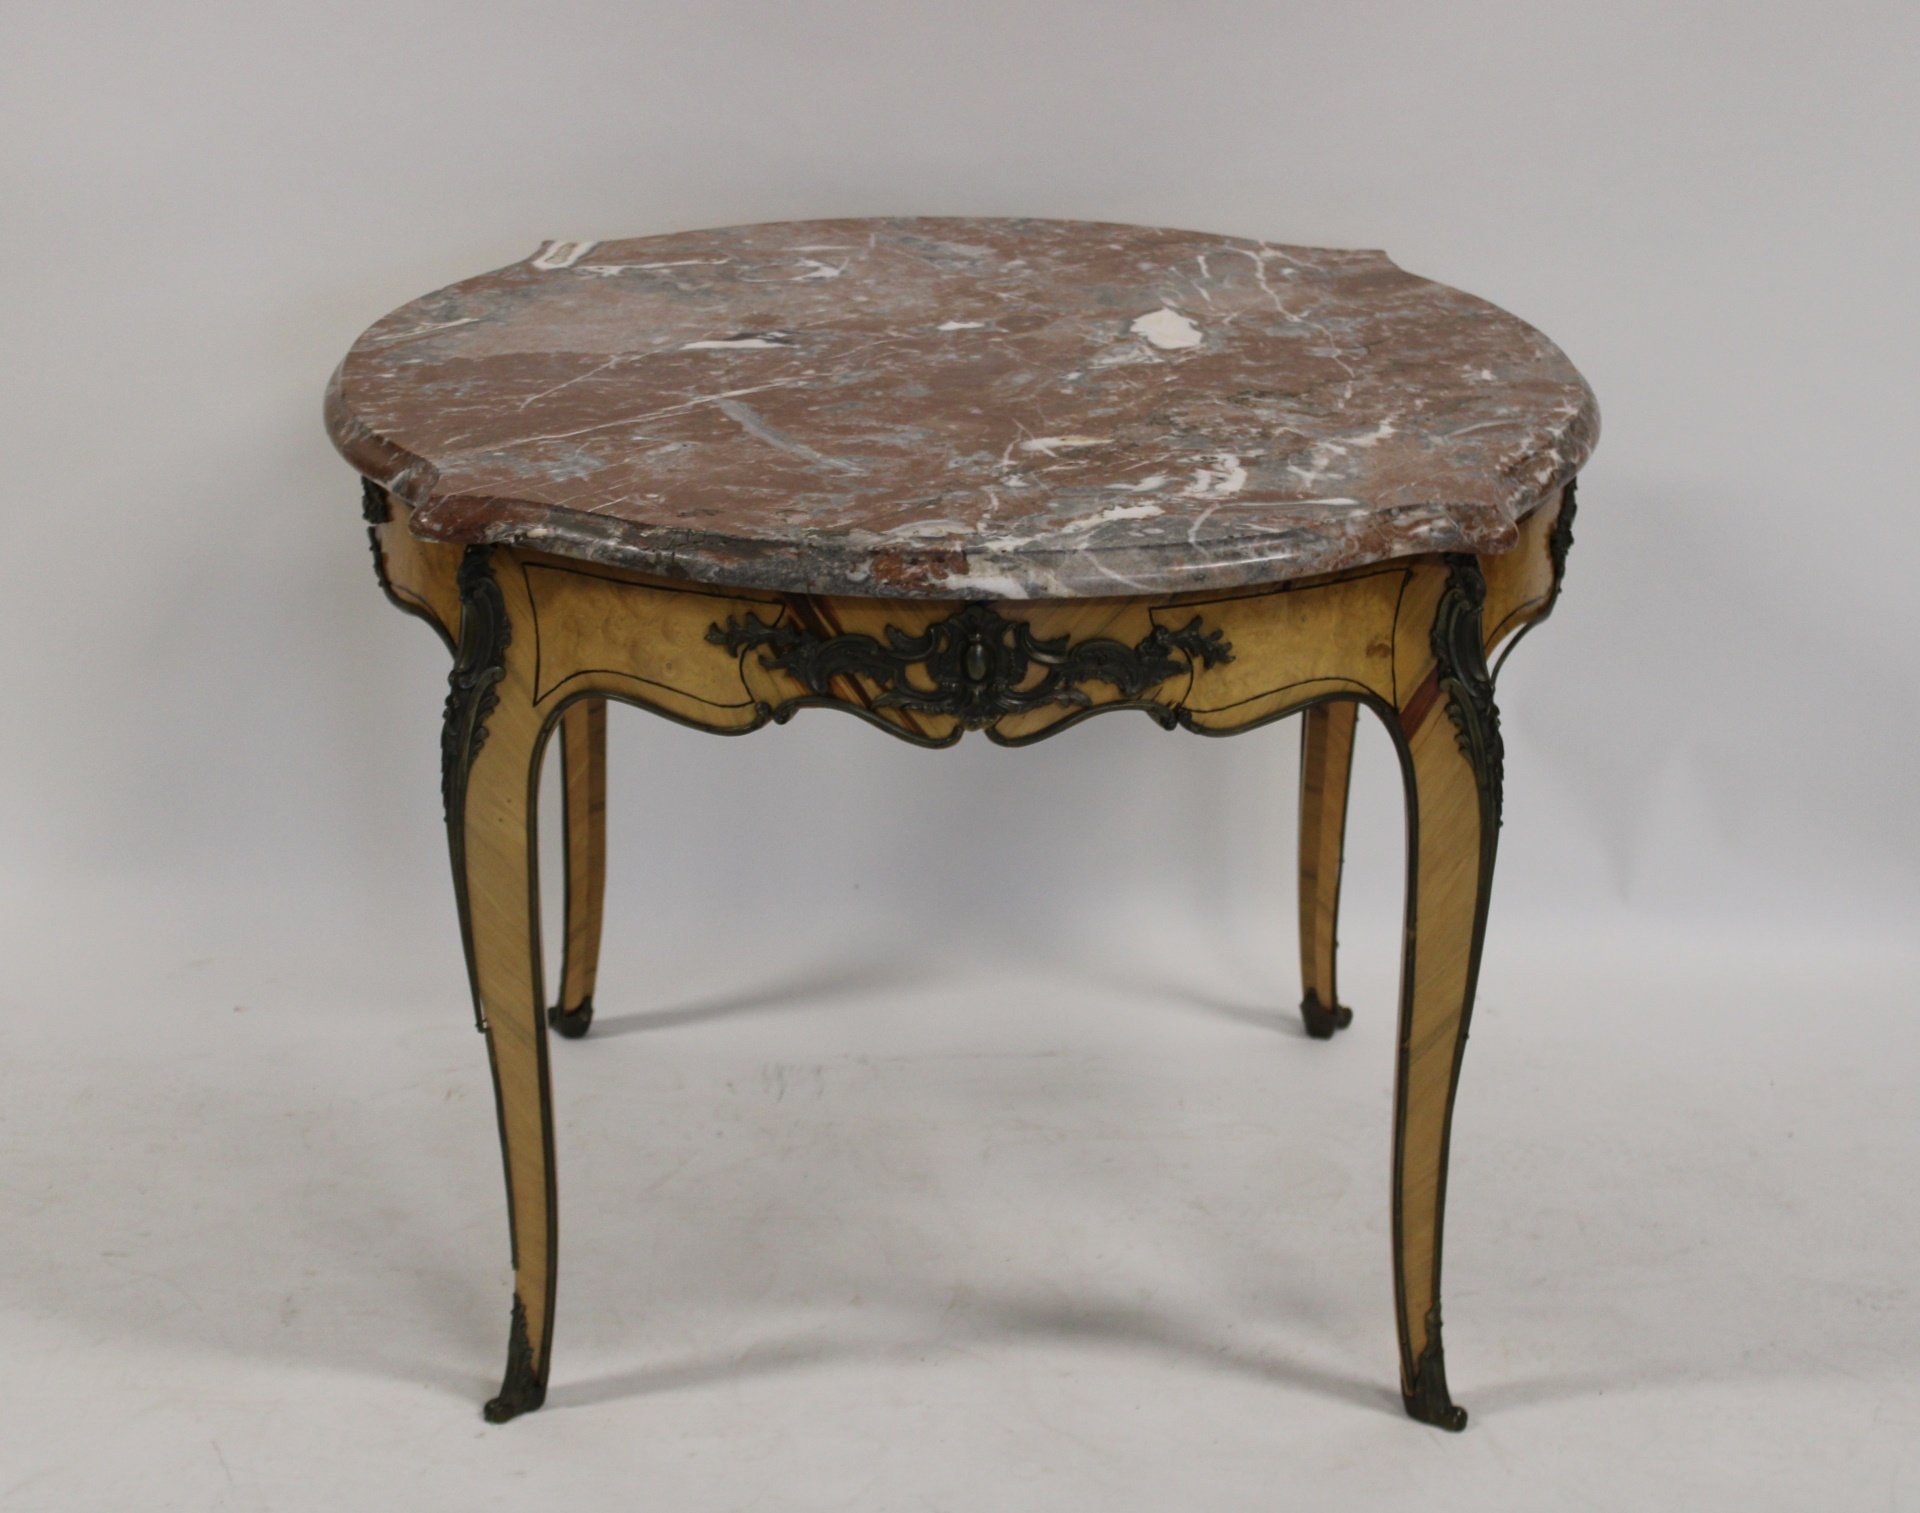 LOUIS XV STYLE BRONZE MOUNTED MARBLETOP